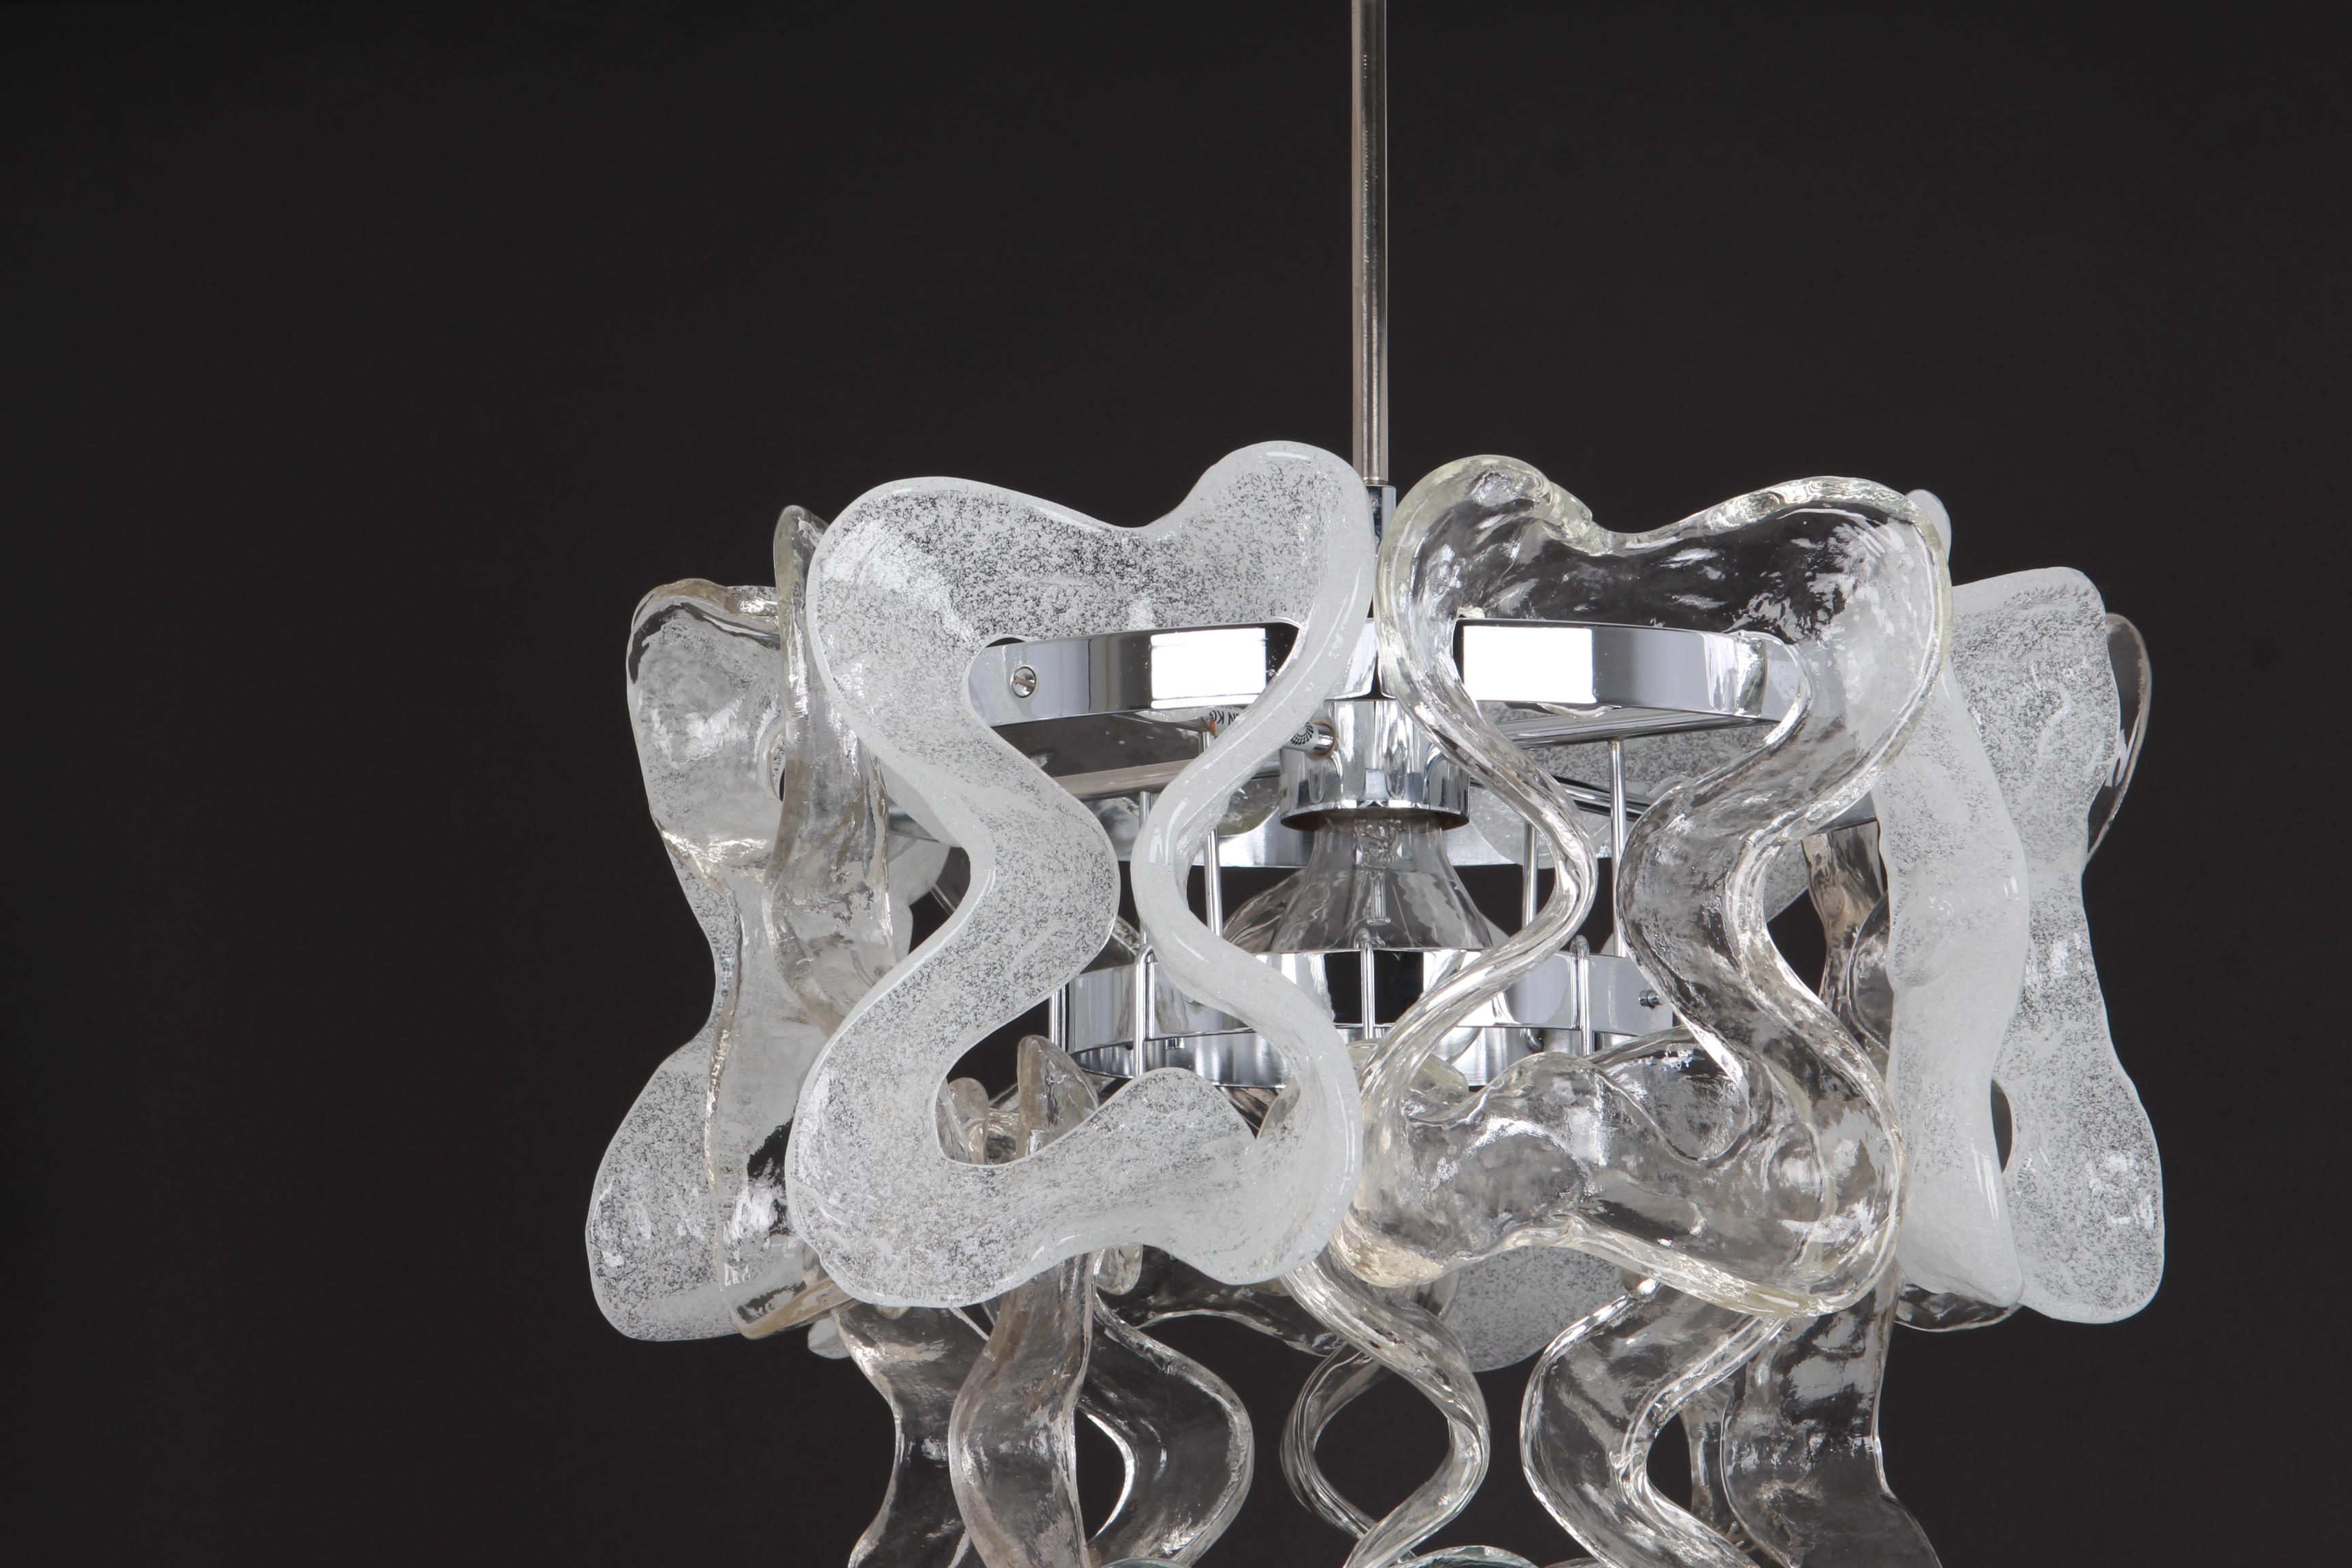 A stunning chrome pendant light with Murano glass elements designed by Carlo Nason for Kalmar, Austria, manufactured in 1960s. (Series: Catena)
The pendant is composed of 18 thick Murano textured ice glass elements attached to a chrome metal